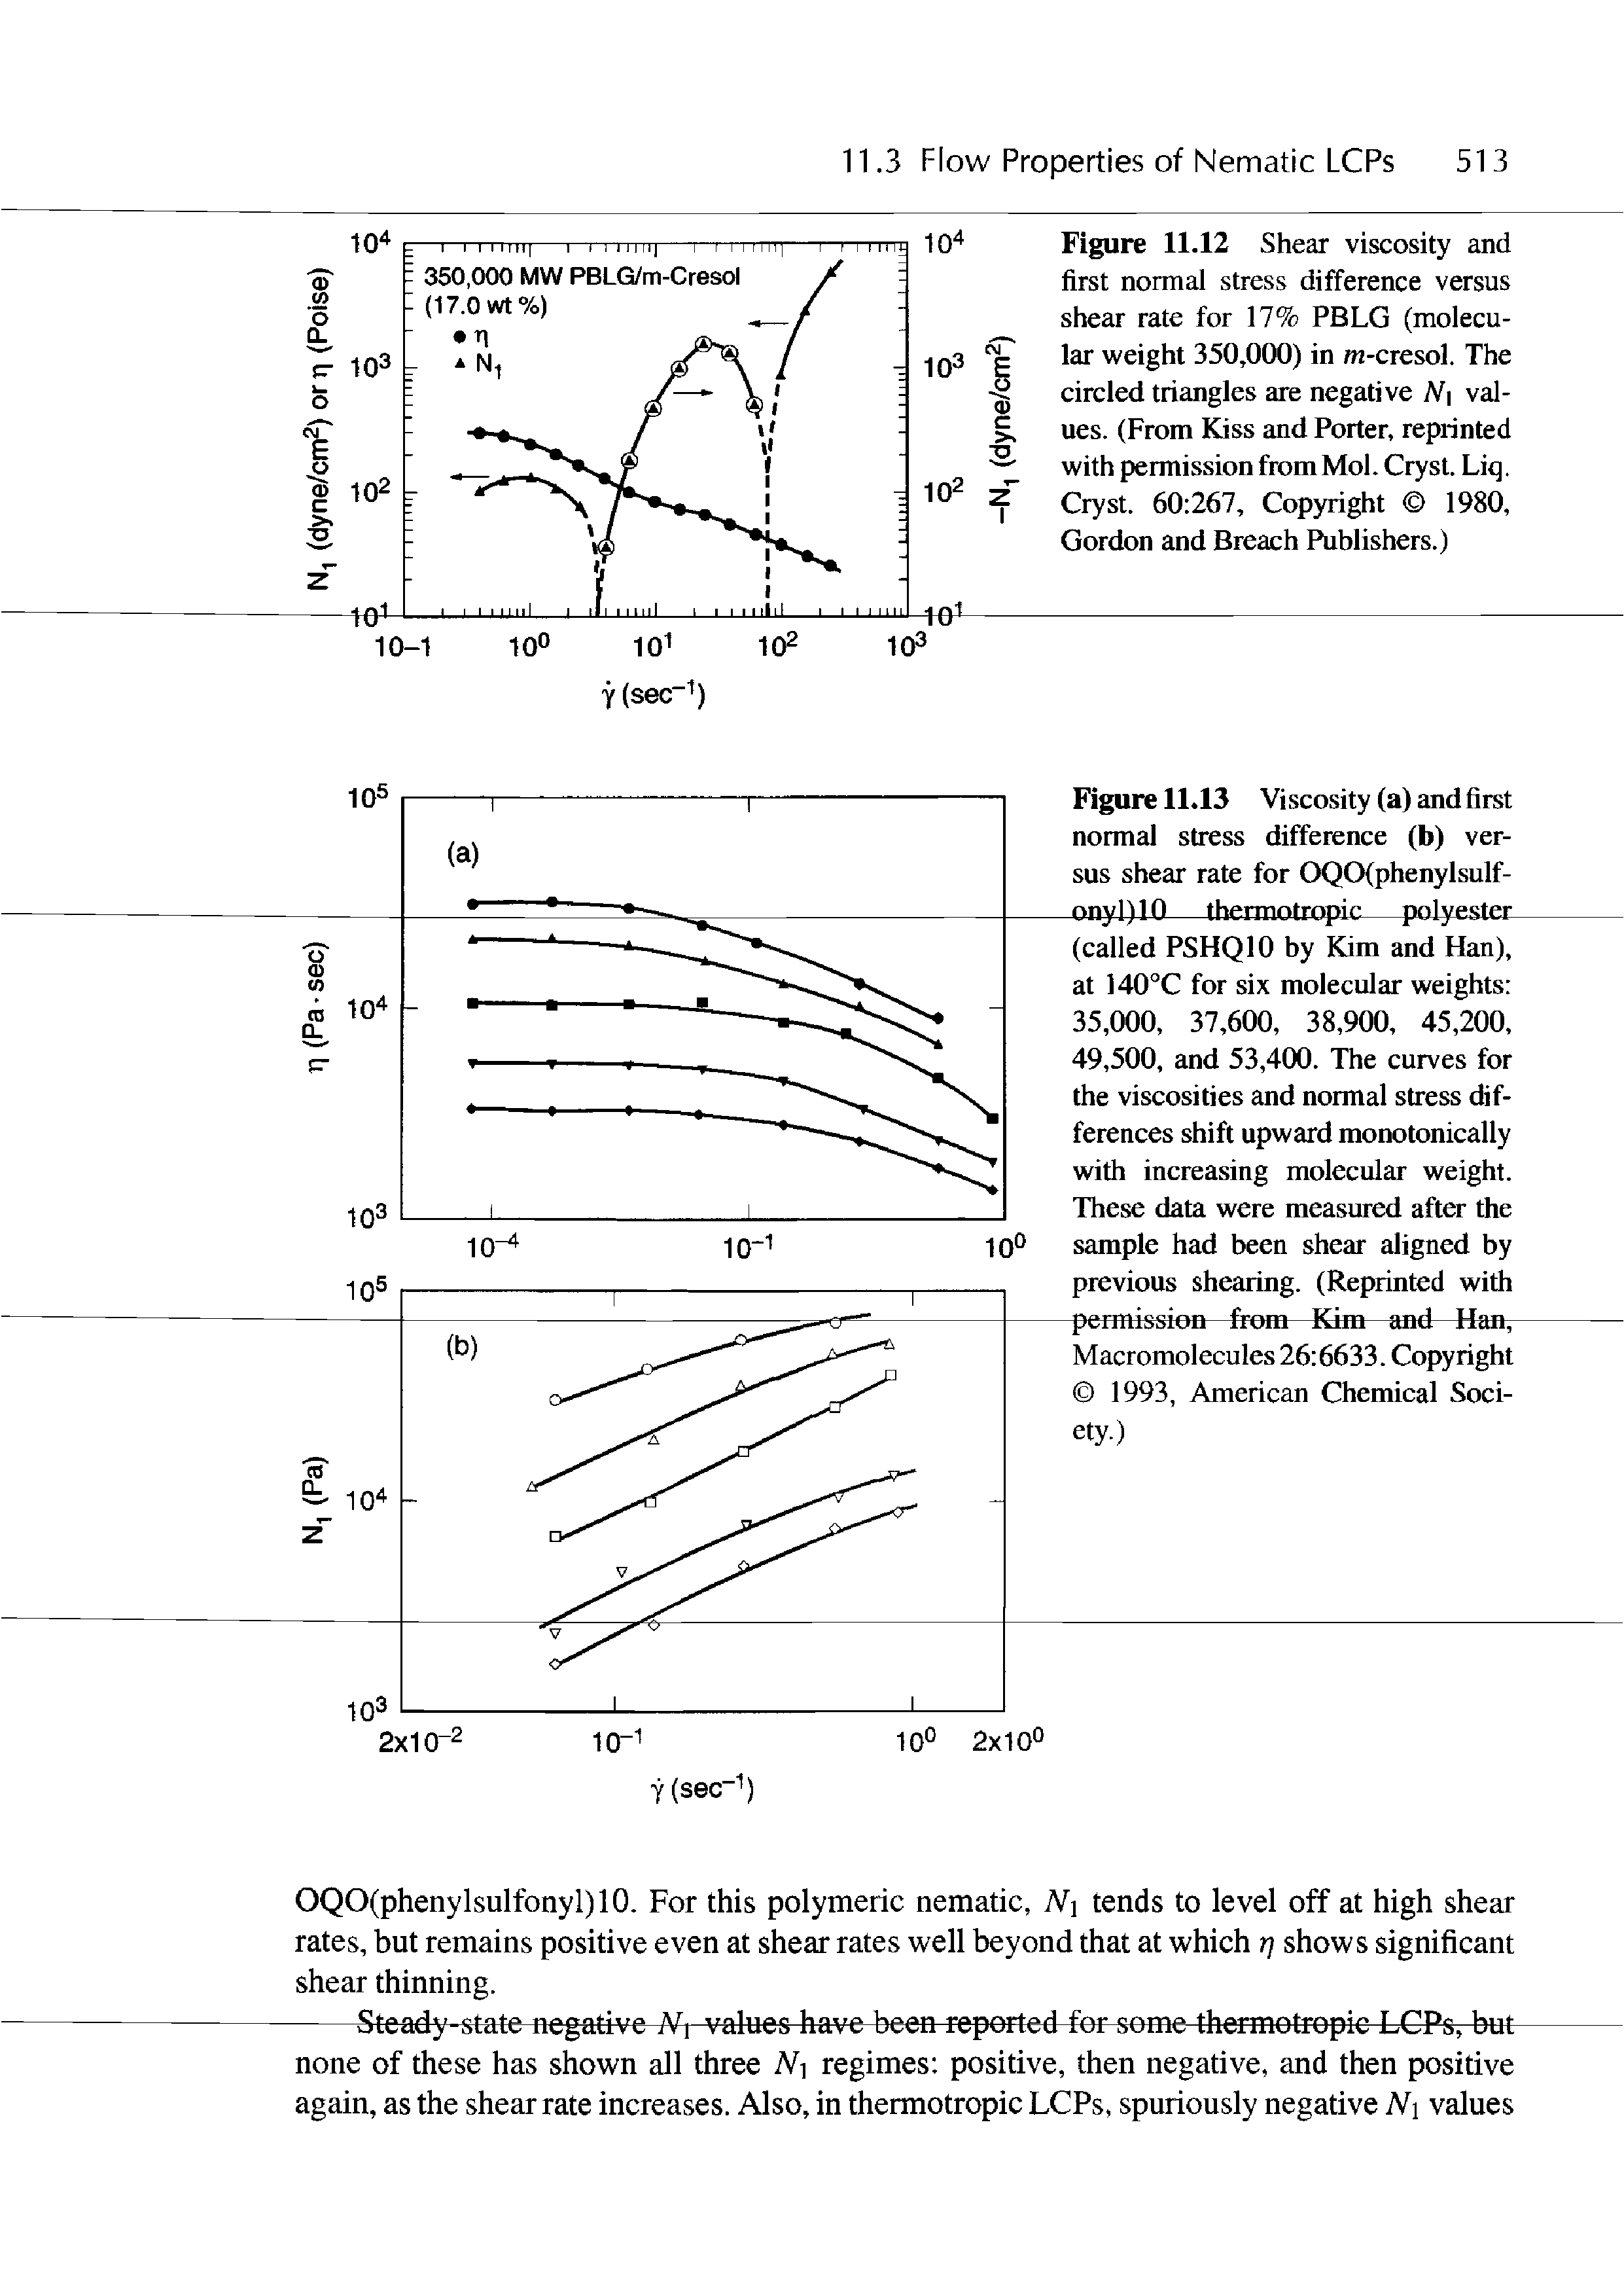 Figure 11.12 Shear viscosity and first normal stress difference versus shear rate for 17% PBLG (molecular weight 350,000) in /n-cresol. The circled triangles are negative N values. (From Kiss and Porter, reprinted with permission fromMol. Cryst. Liq. Cryst. 60 267, Copyright 1980, Gordon and Breach Publishers.)...